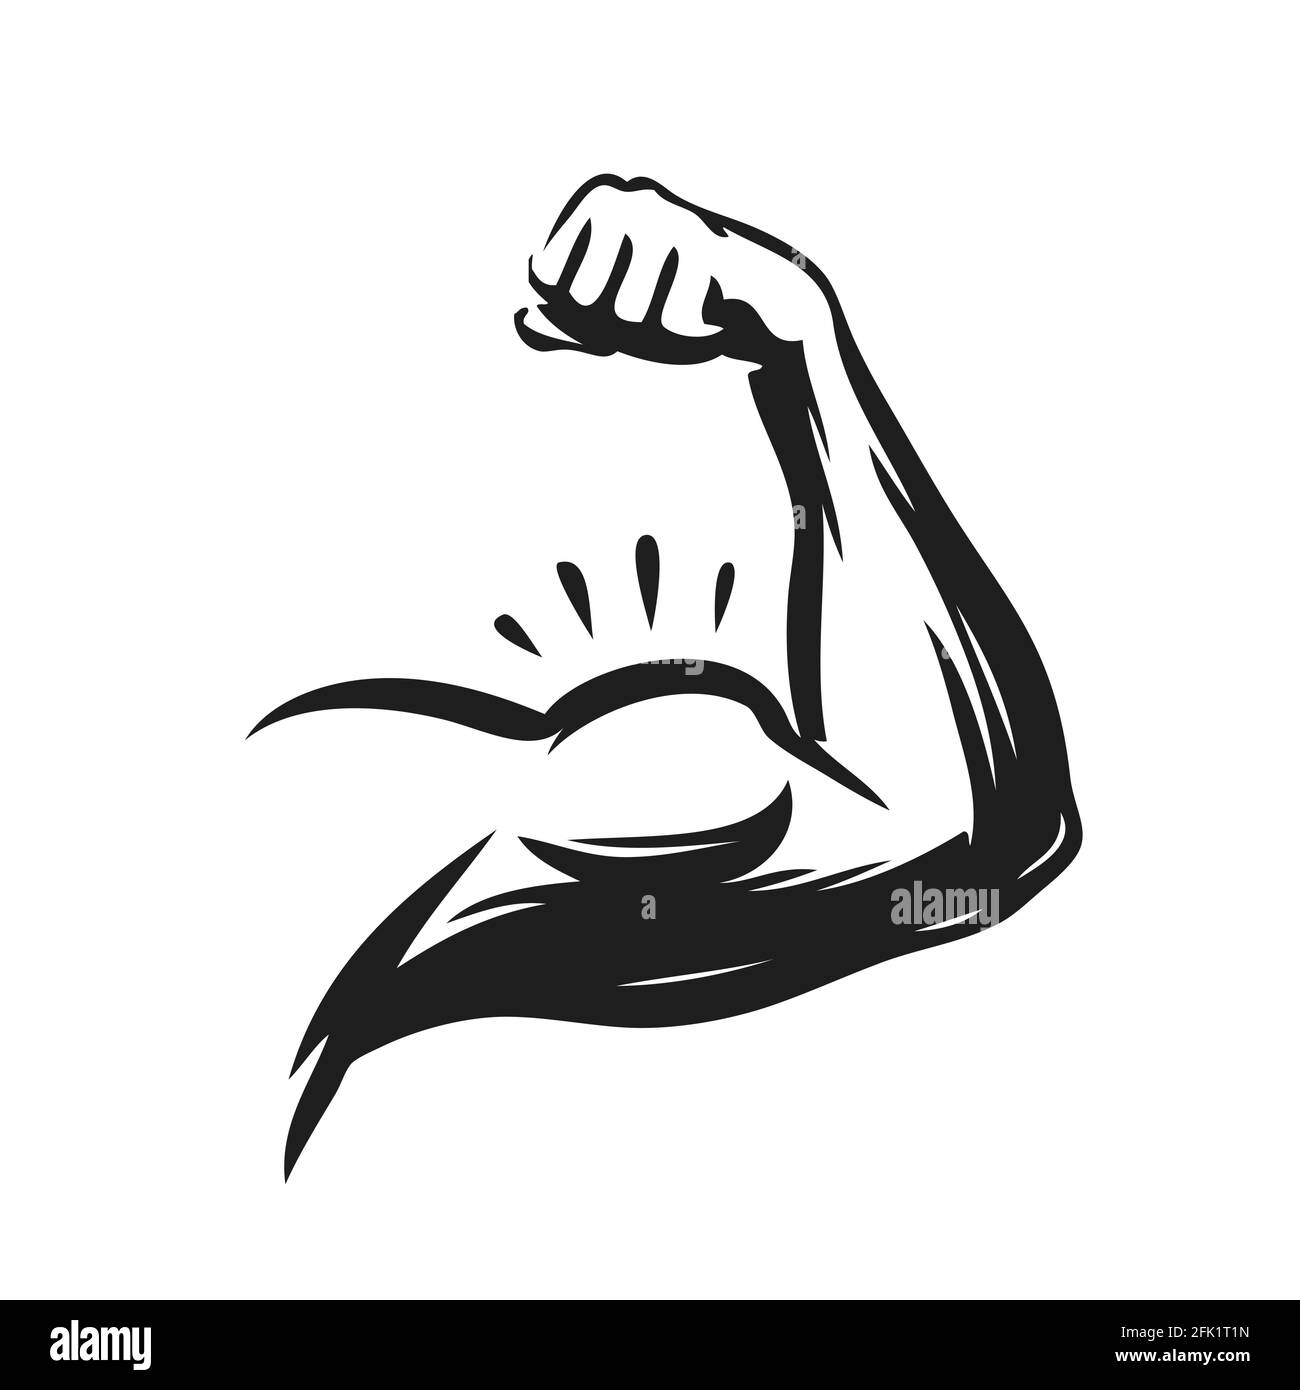 Strong muscle arm. Power symbol vector illustration Stock Vector Image ...